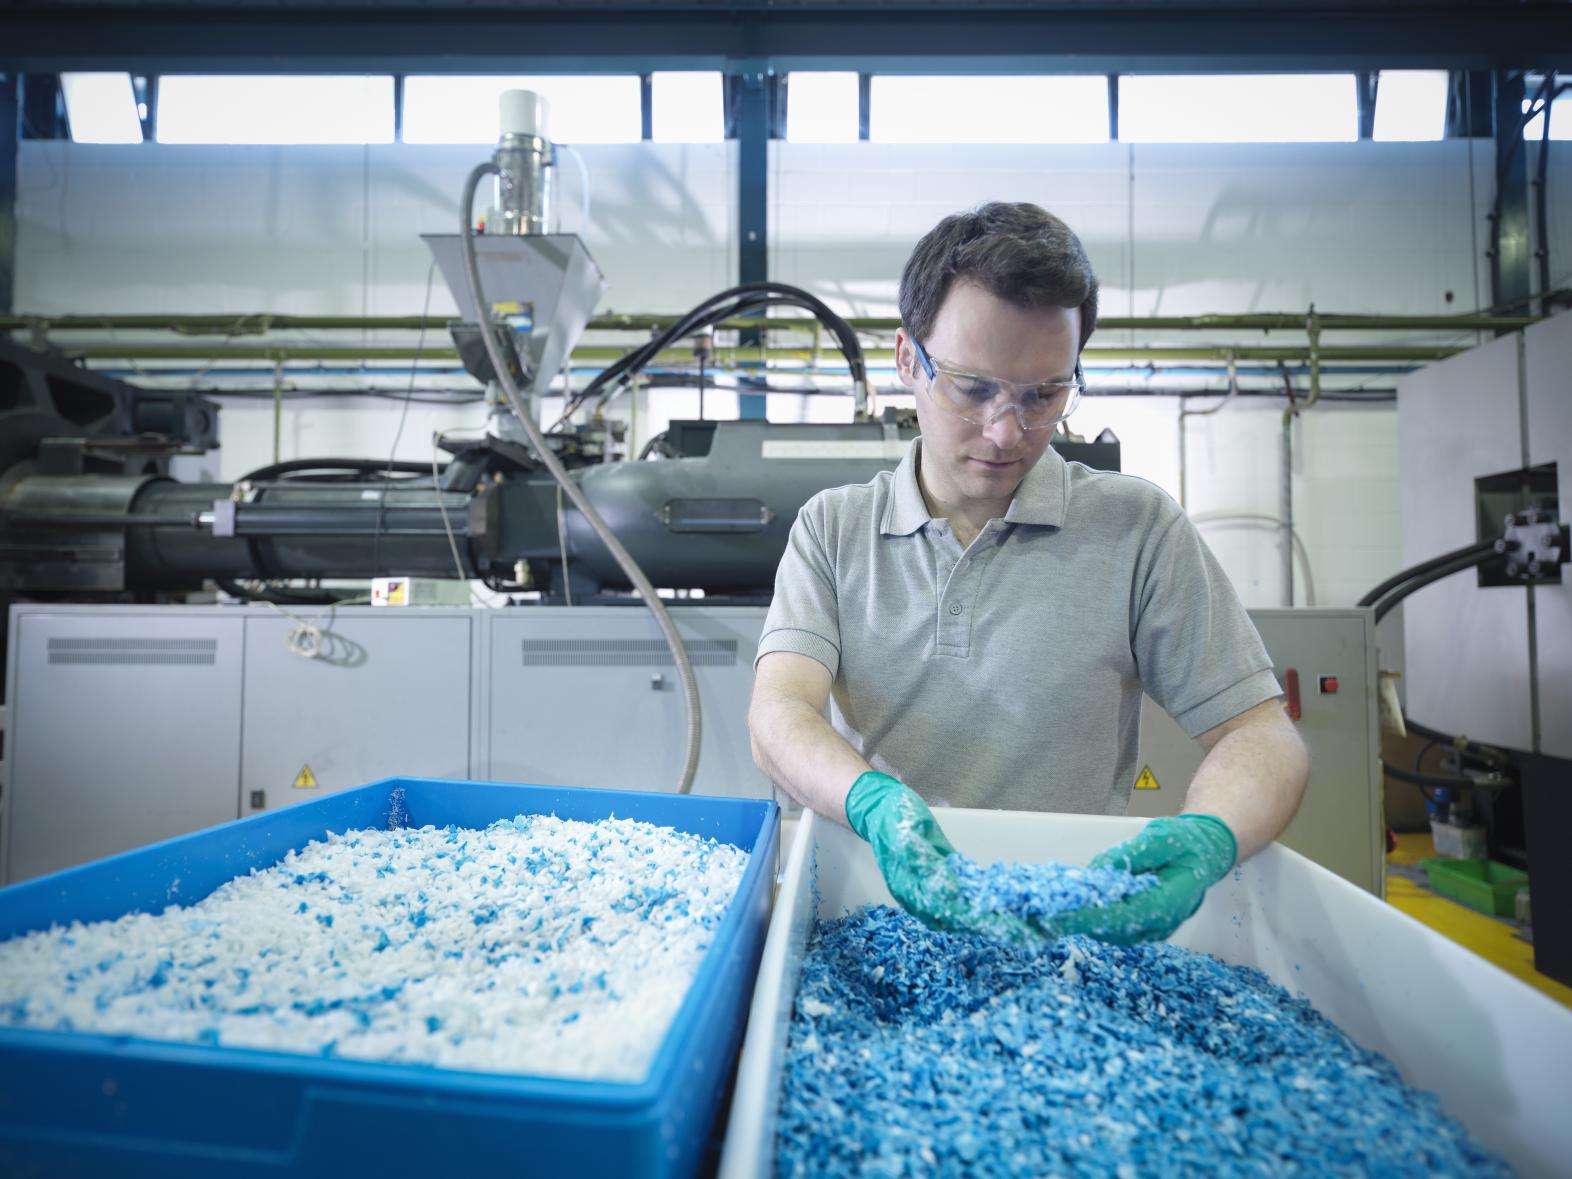 Man examining plastic pellets in a processing/recycling facility 